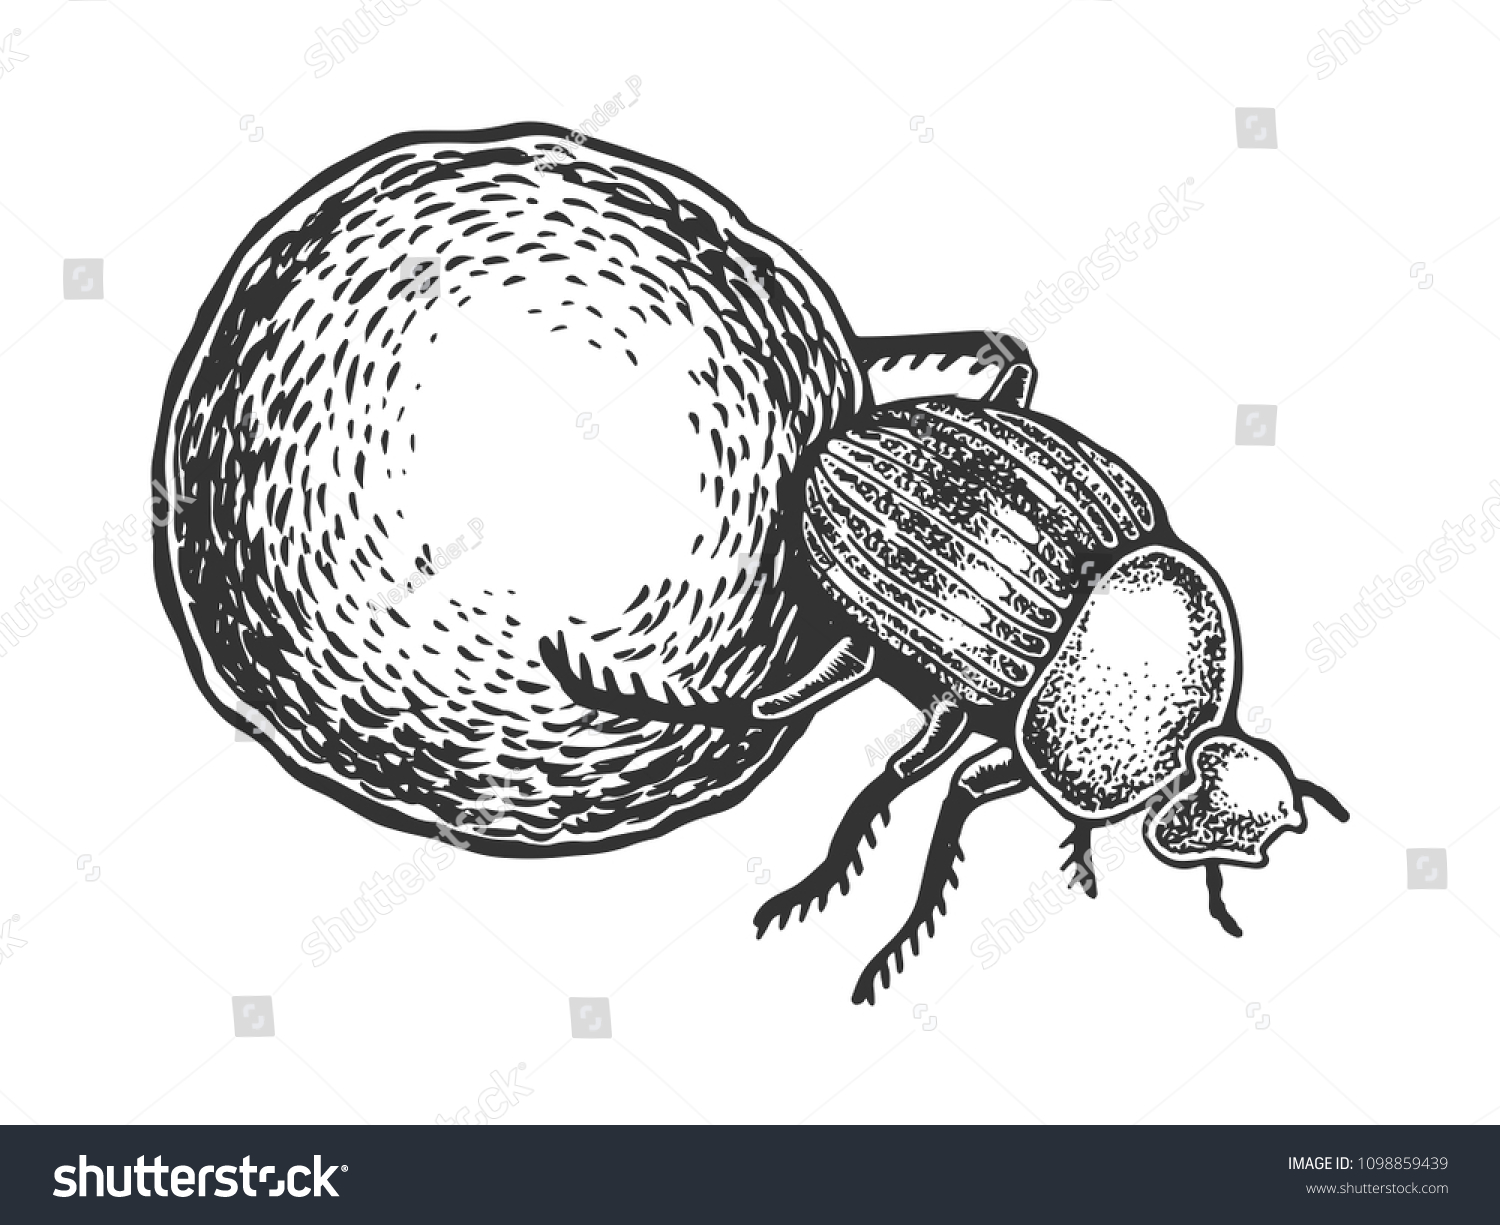 SVG of Dor beetle bug insect animal engraving vector illustration. Scratch board style imitation. Black and white hand drawn image. svg